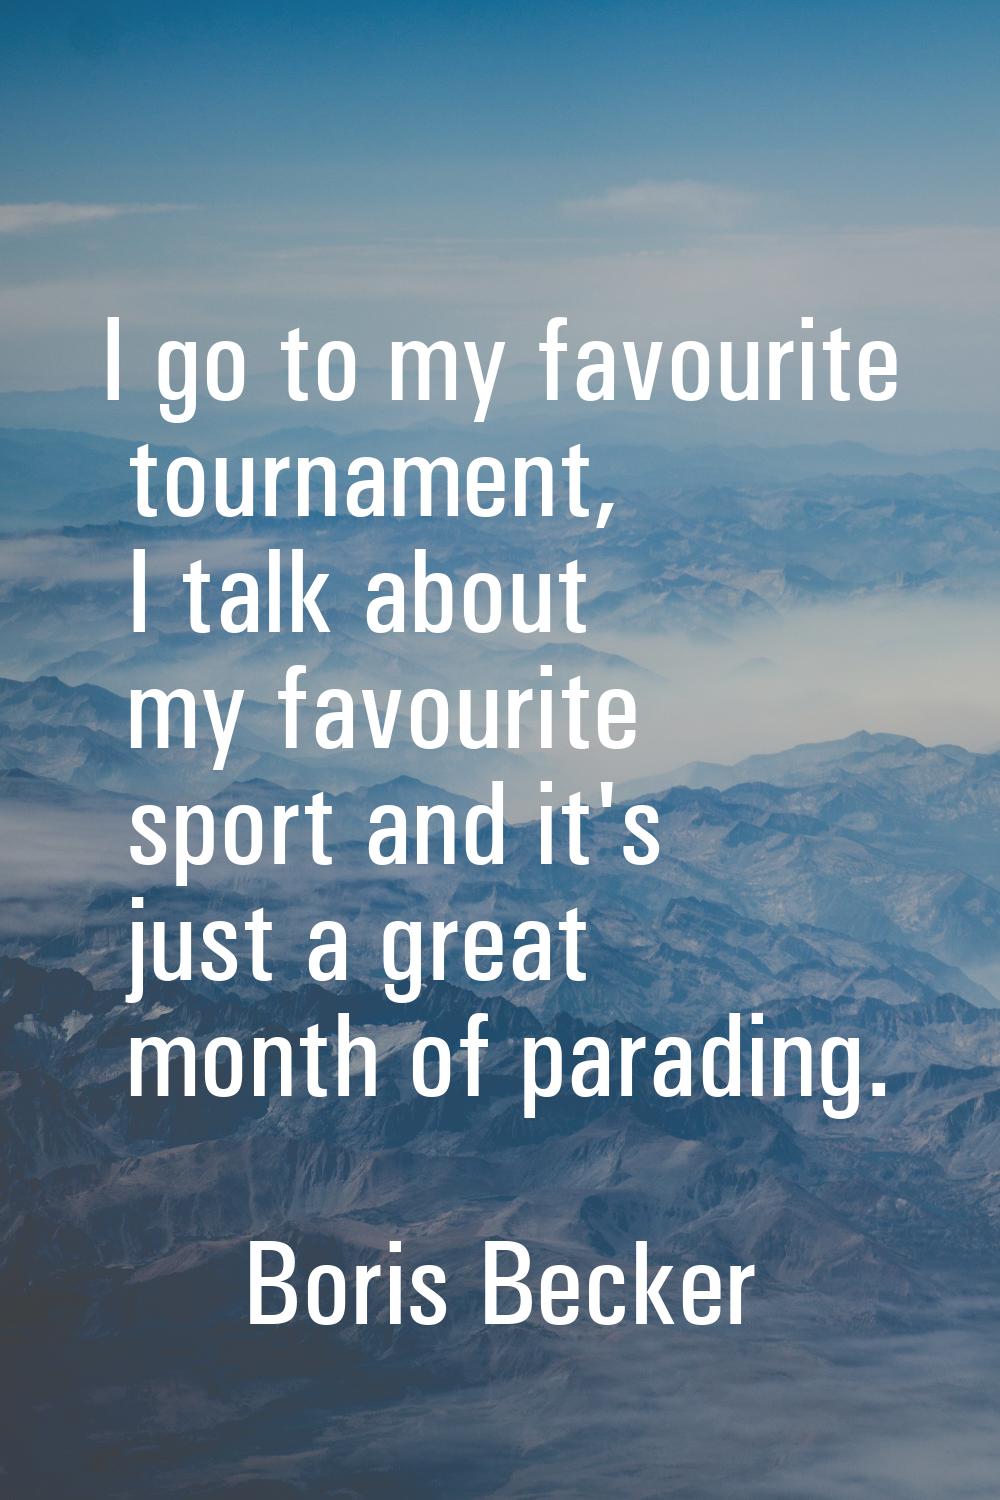 I go to my favourite tournament, I talk about my favourite sport and it's just a great month of par